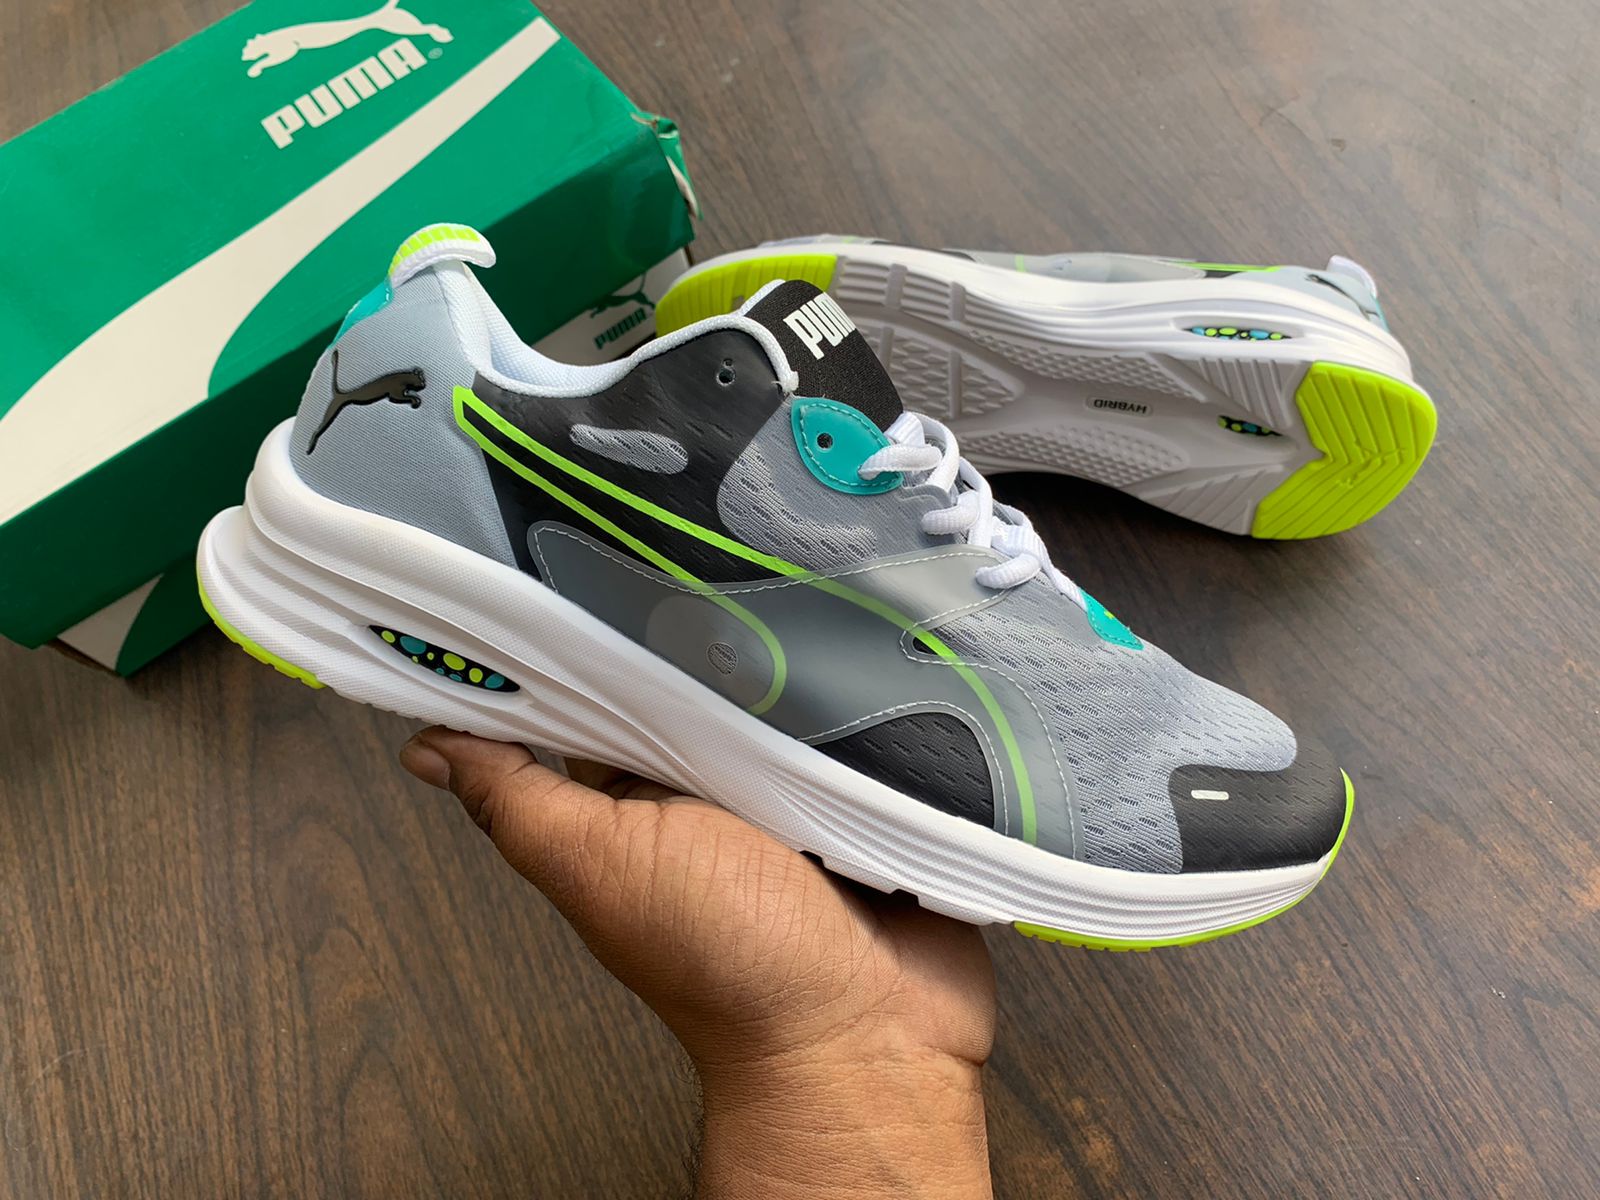 Puma Hybrid shoes on sale - shoeseller.in